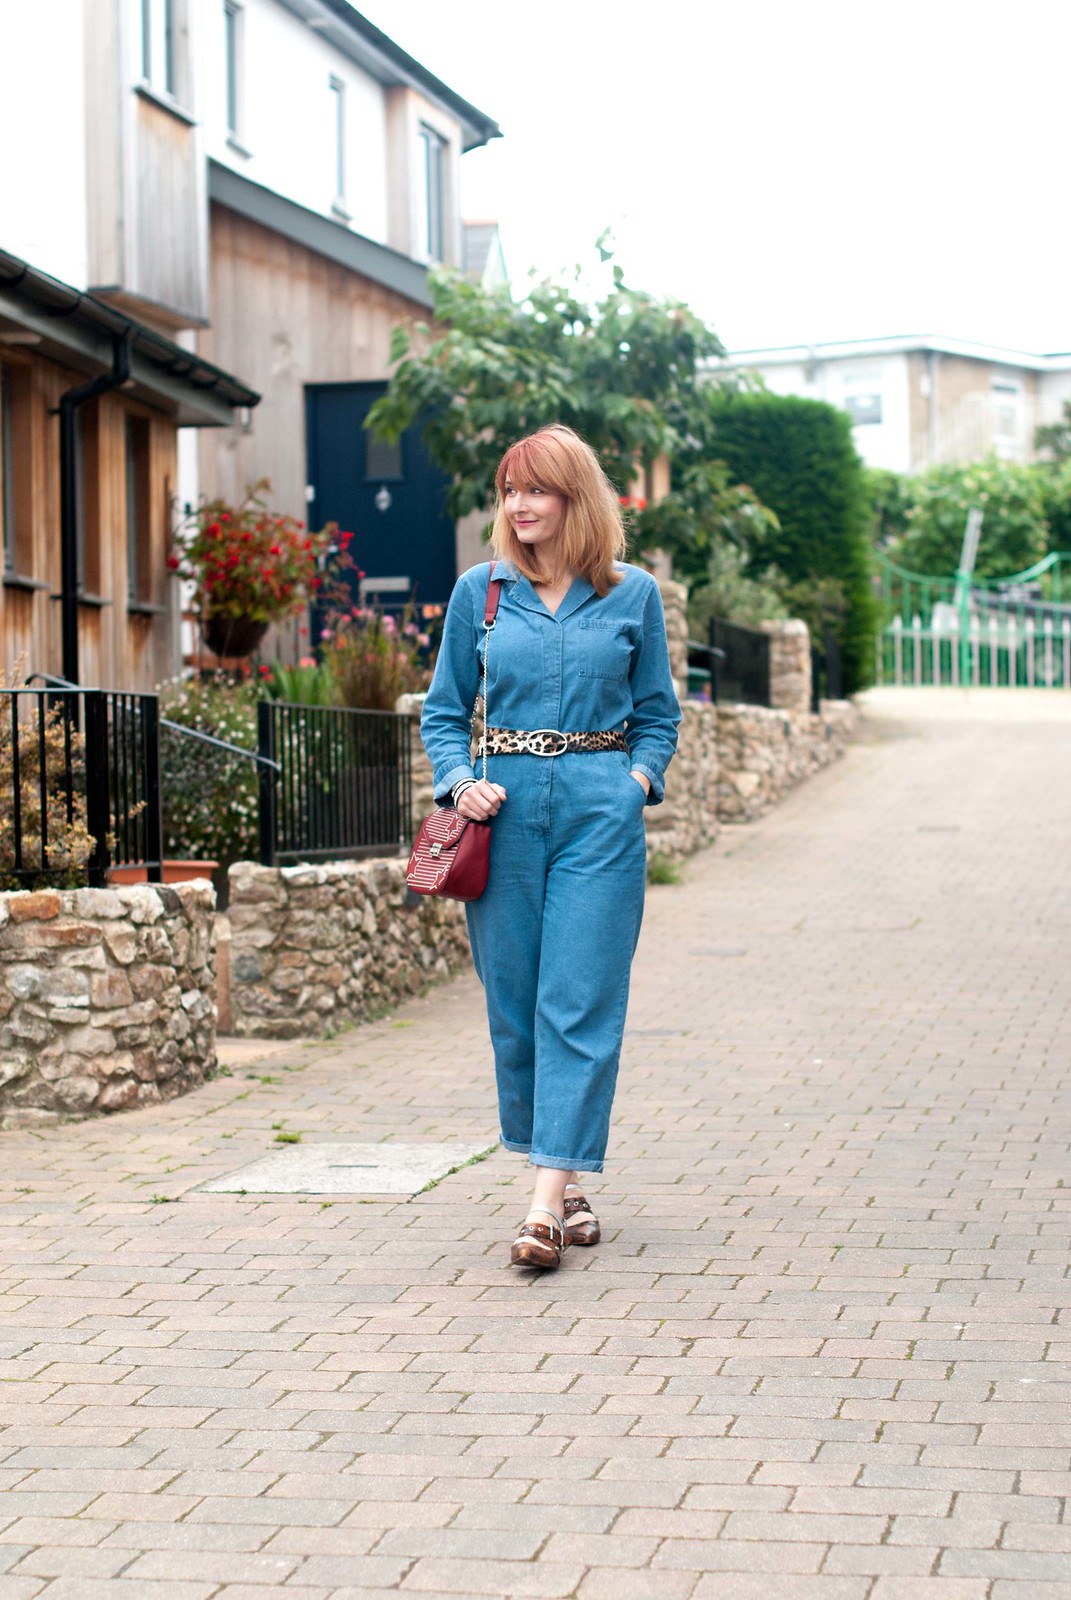 How to style a denim jumpsuit / boilersuit for the summer leopard print belt red studded crossbody bag pointed toe snakeskin Finery flats | Not Dressed As Lamb, over 40 style